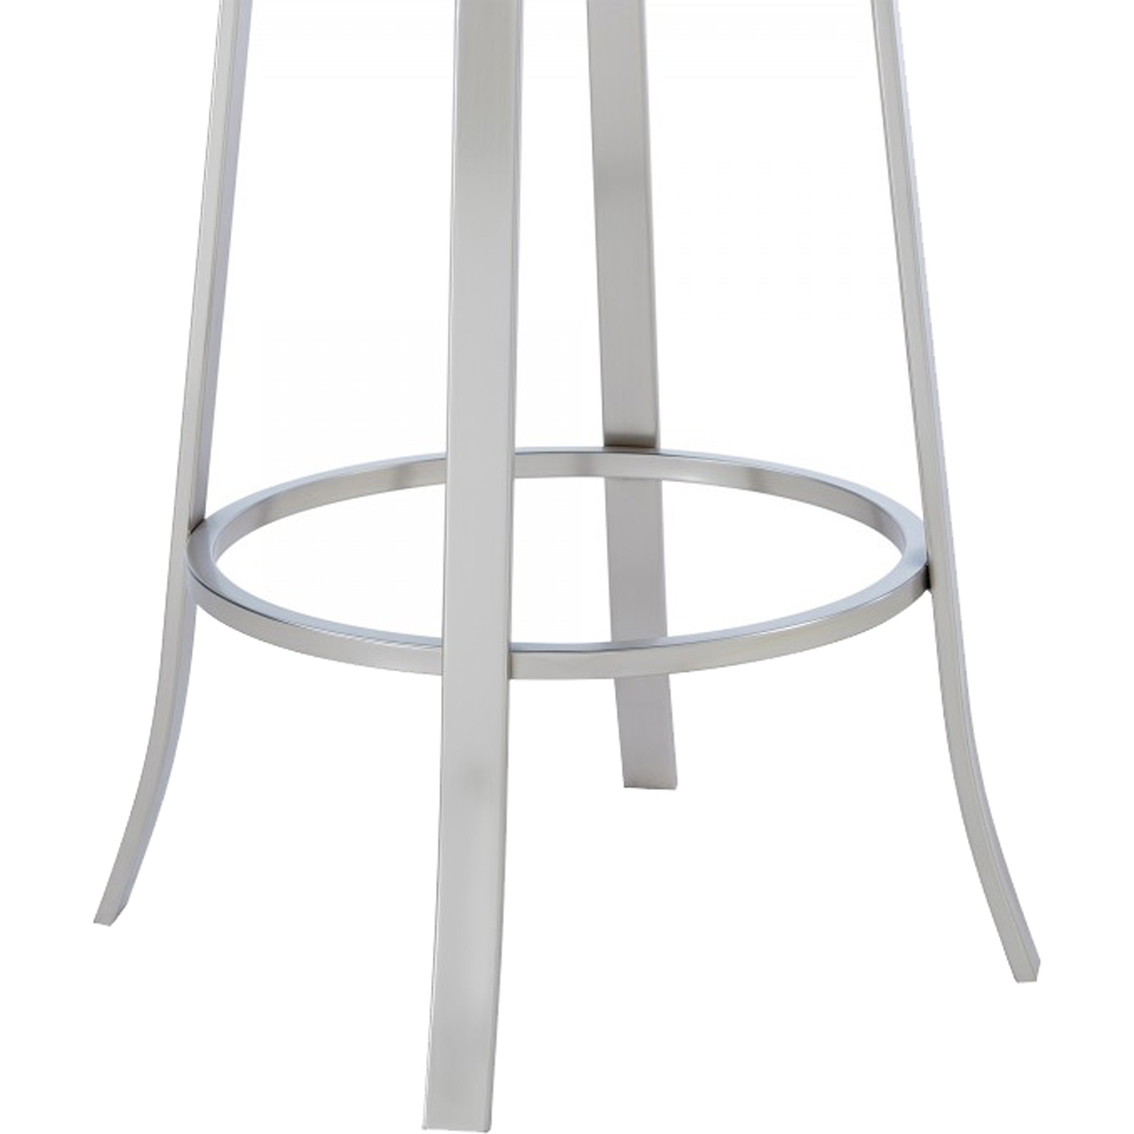 Armen Living Pia Barstool in Brushed Stainless Steel Finish and Grey Faux Leather - Image 6 of 7